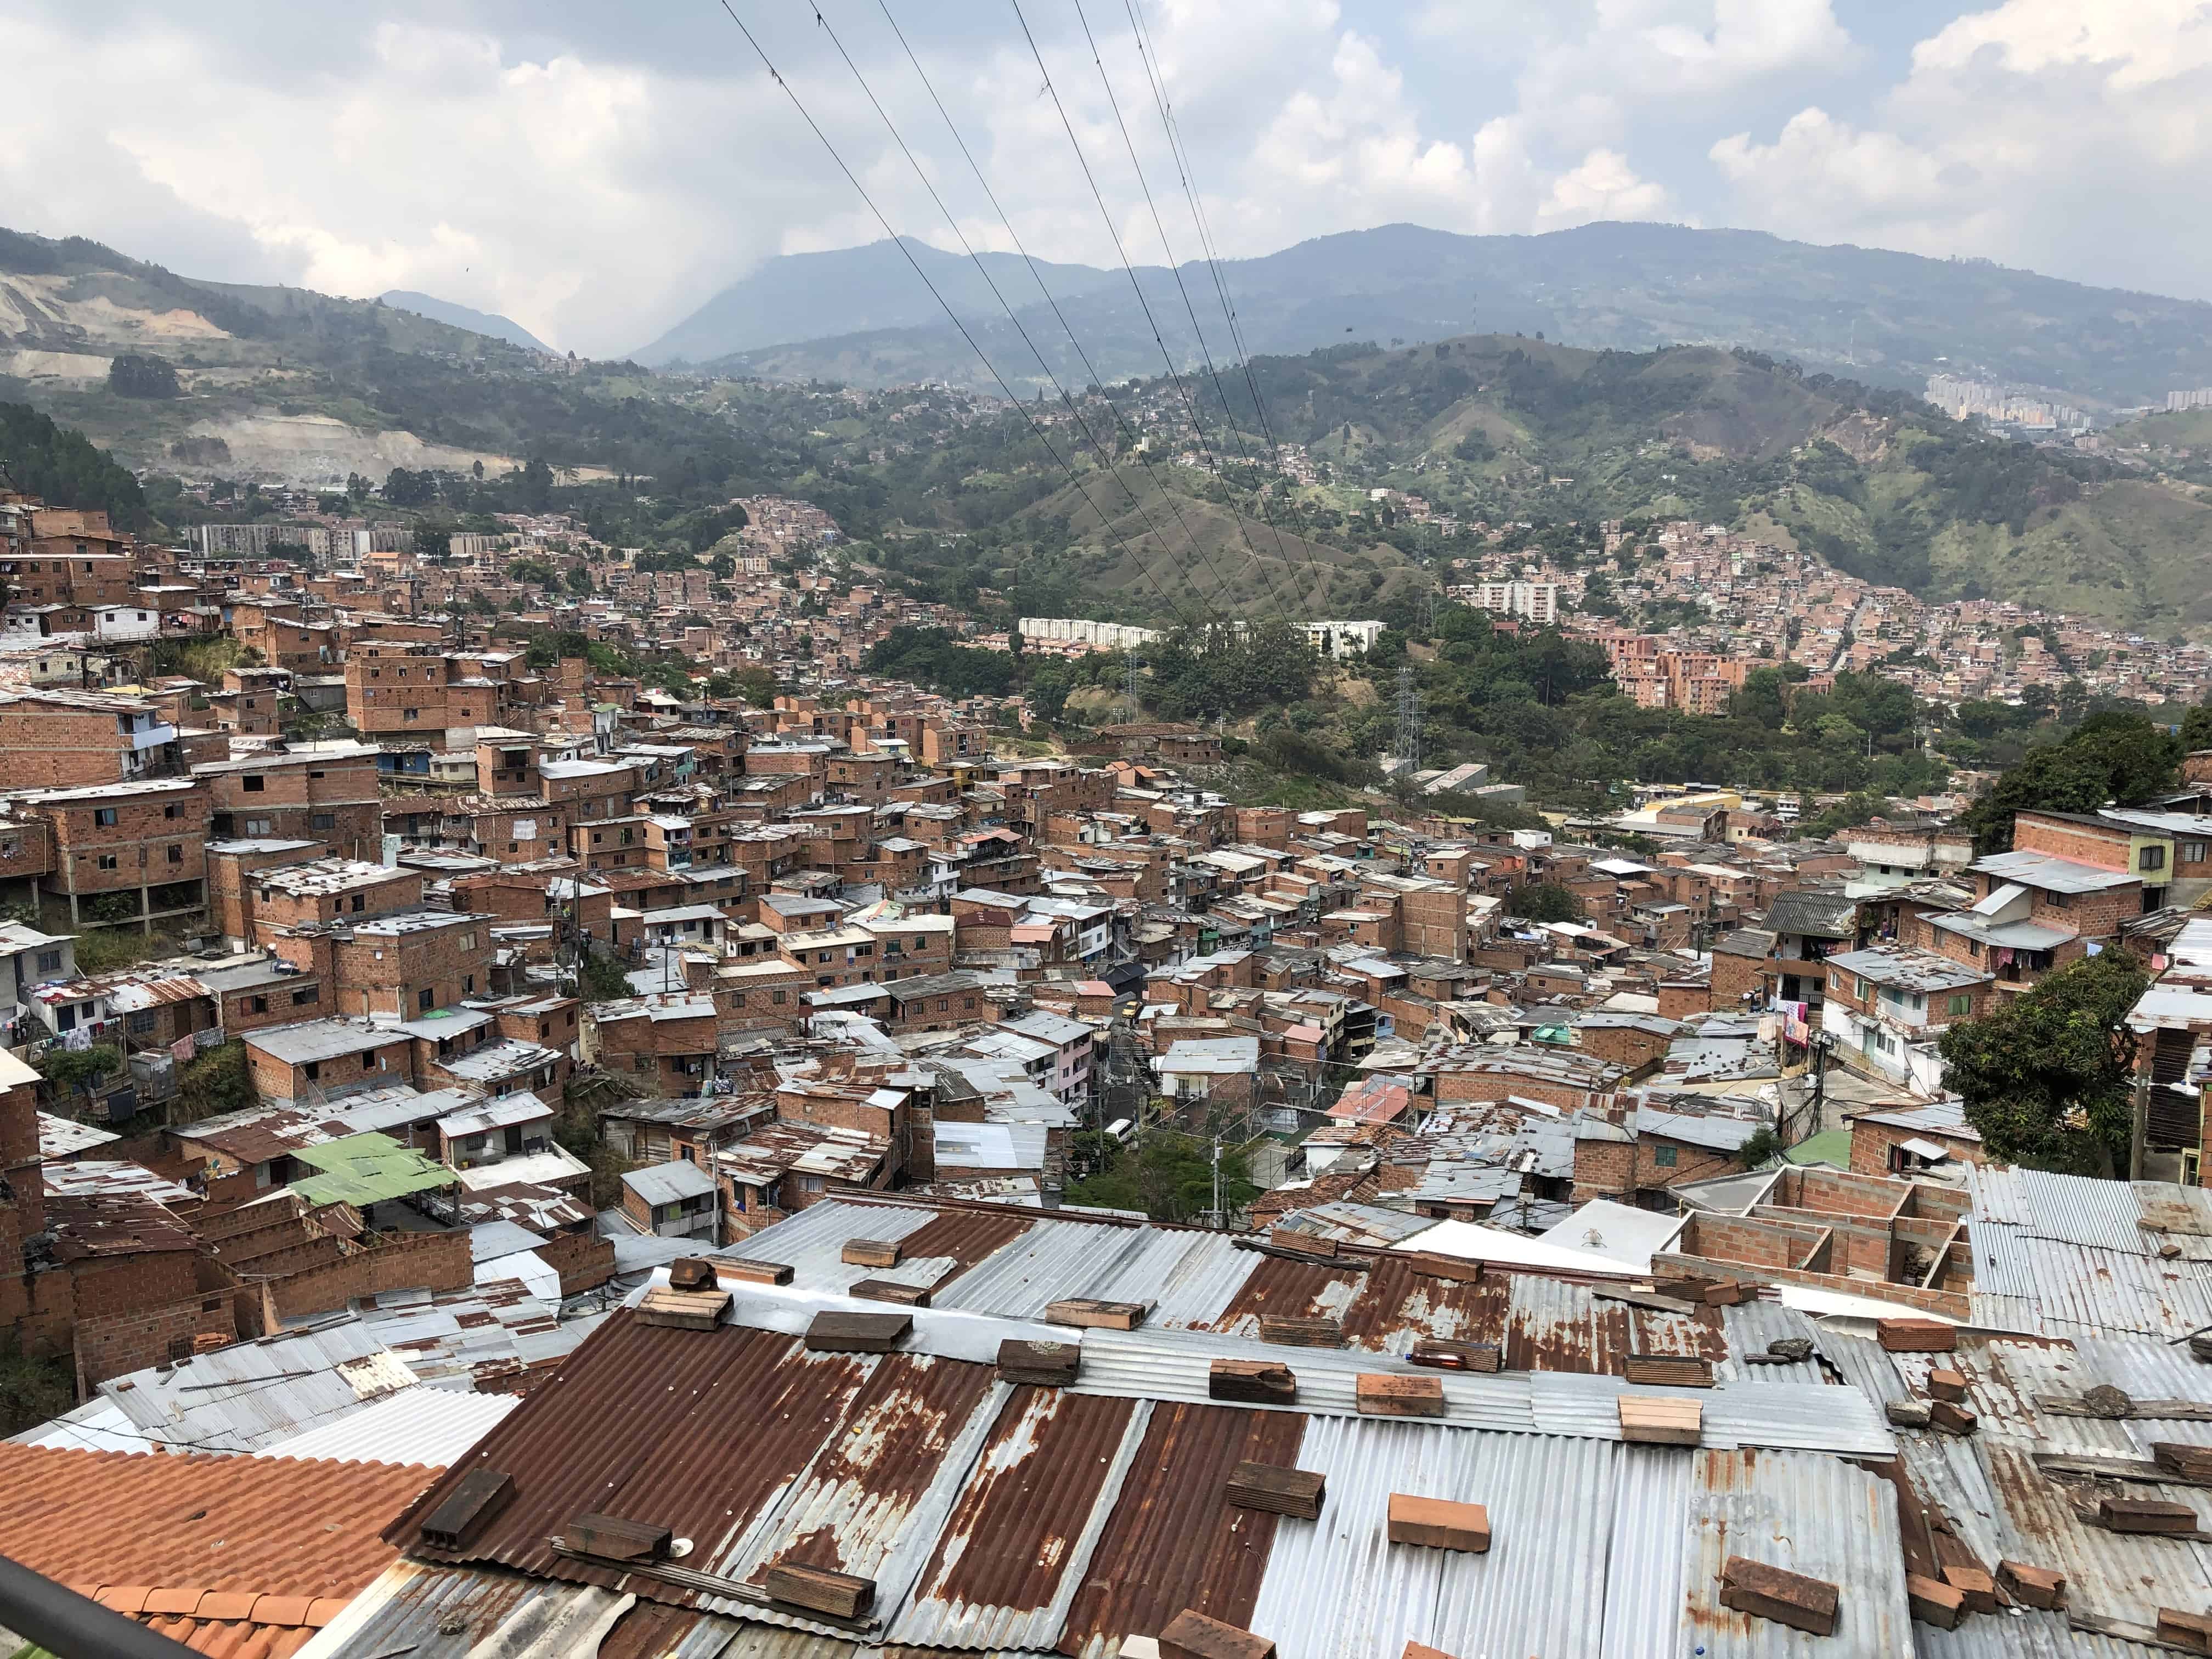 View from the top in Comuna 13, Medellín, Antioquia, Colombia